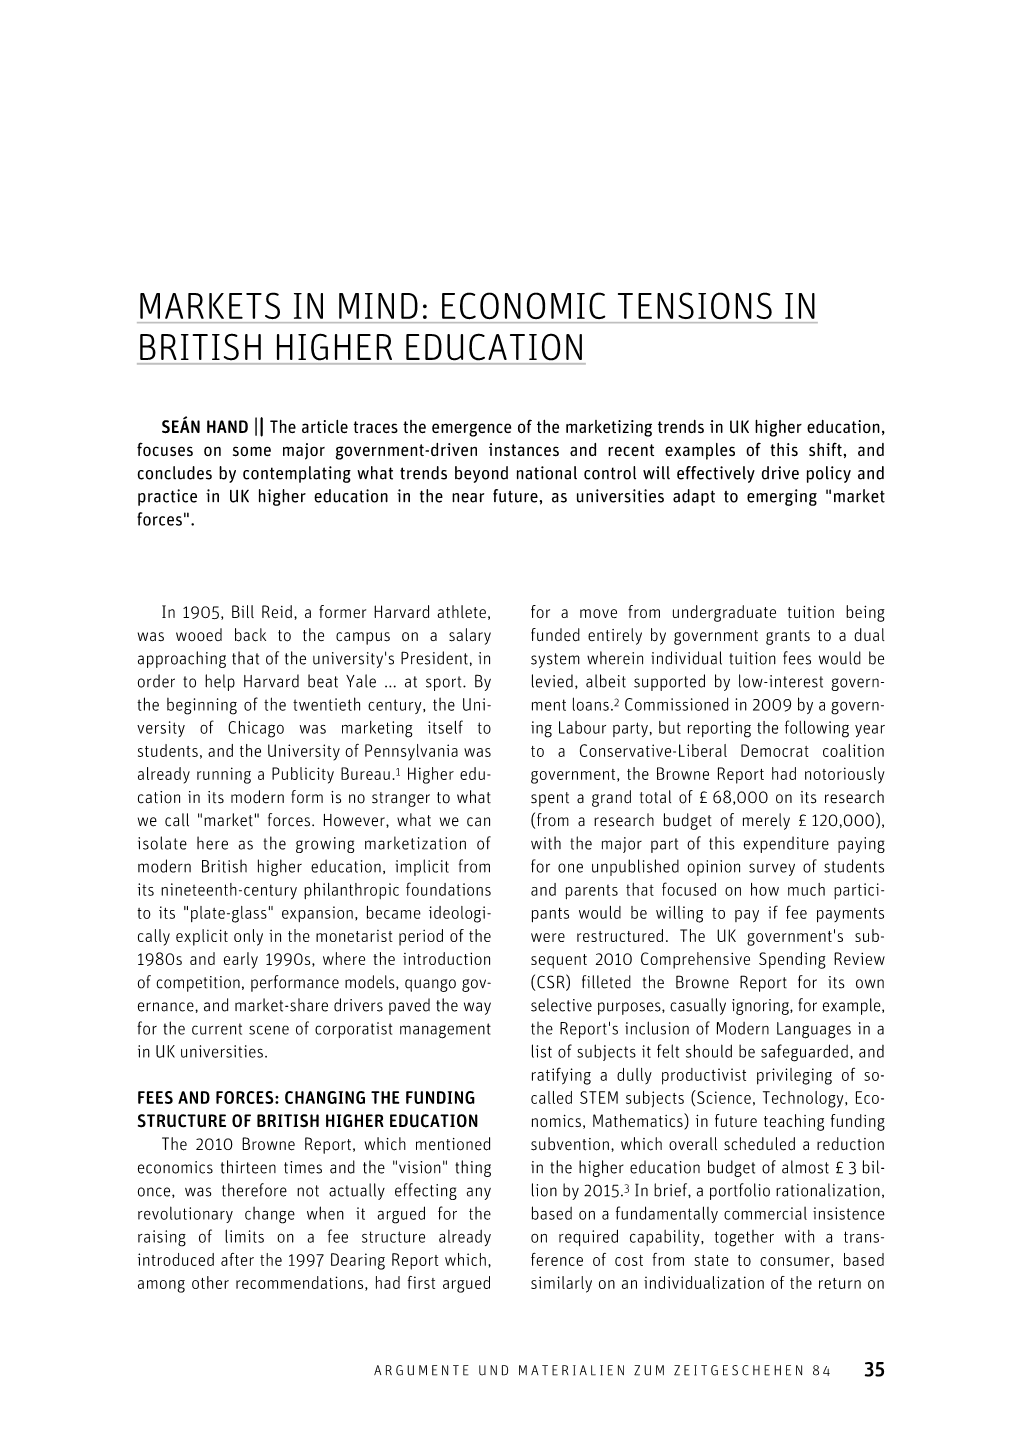 Markets in Mind: Economic Tensions in British Higher Education